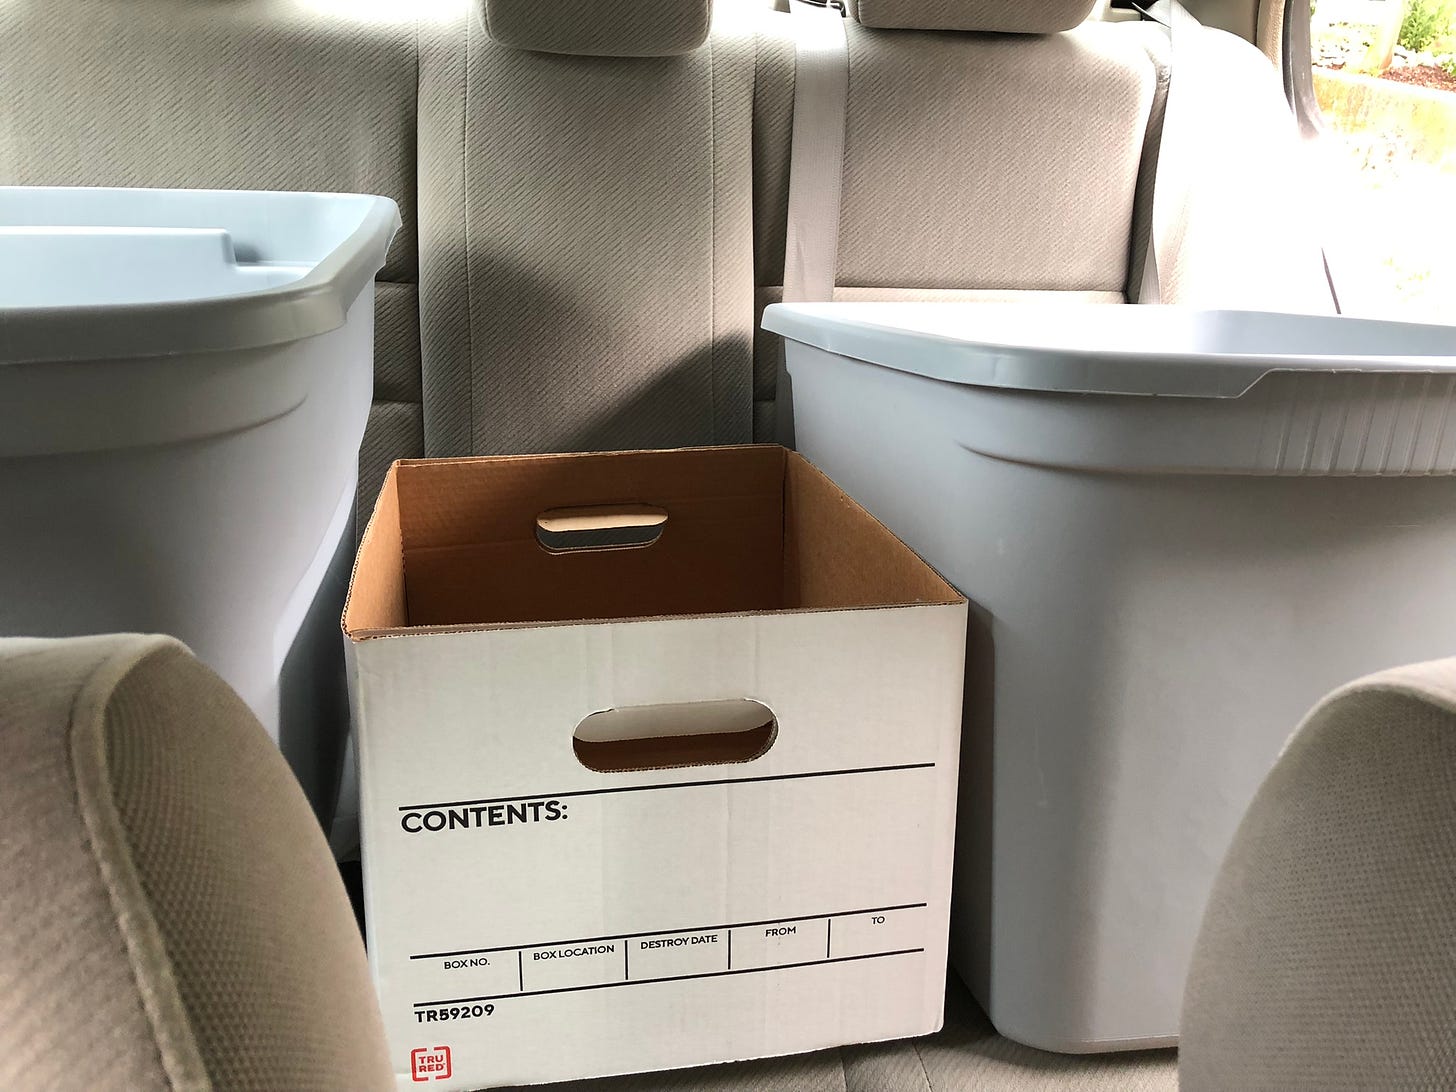 the beige backseat of a car filled with two large grey plastic bins and one staples brand carboard file box, no contents listed